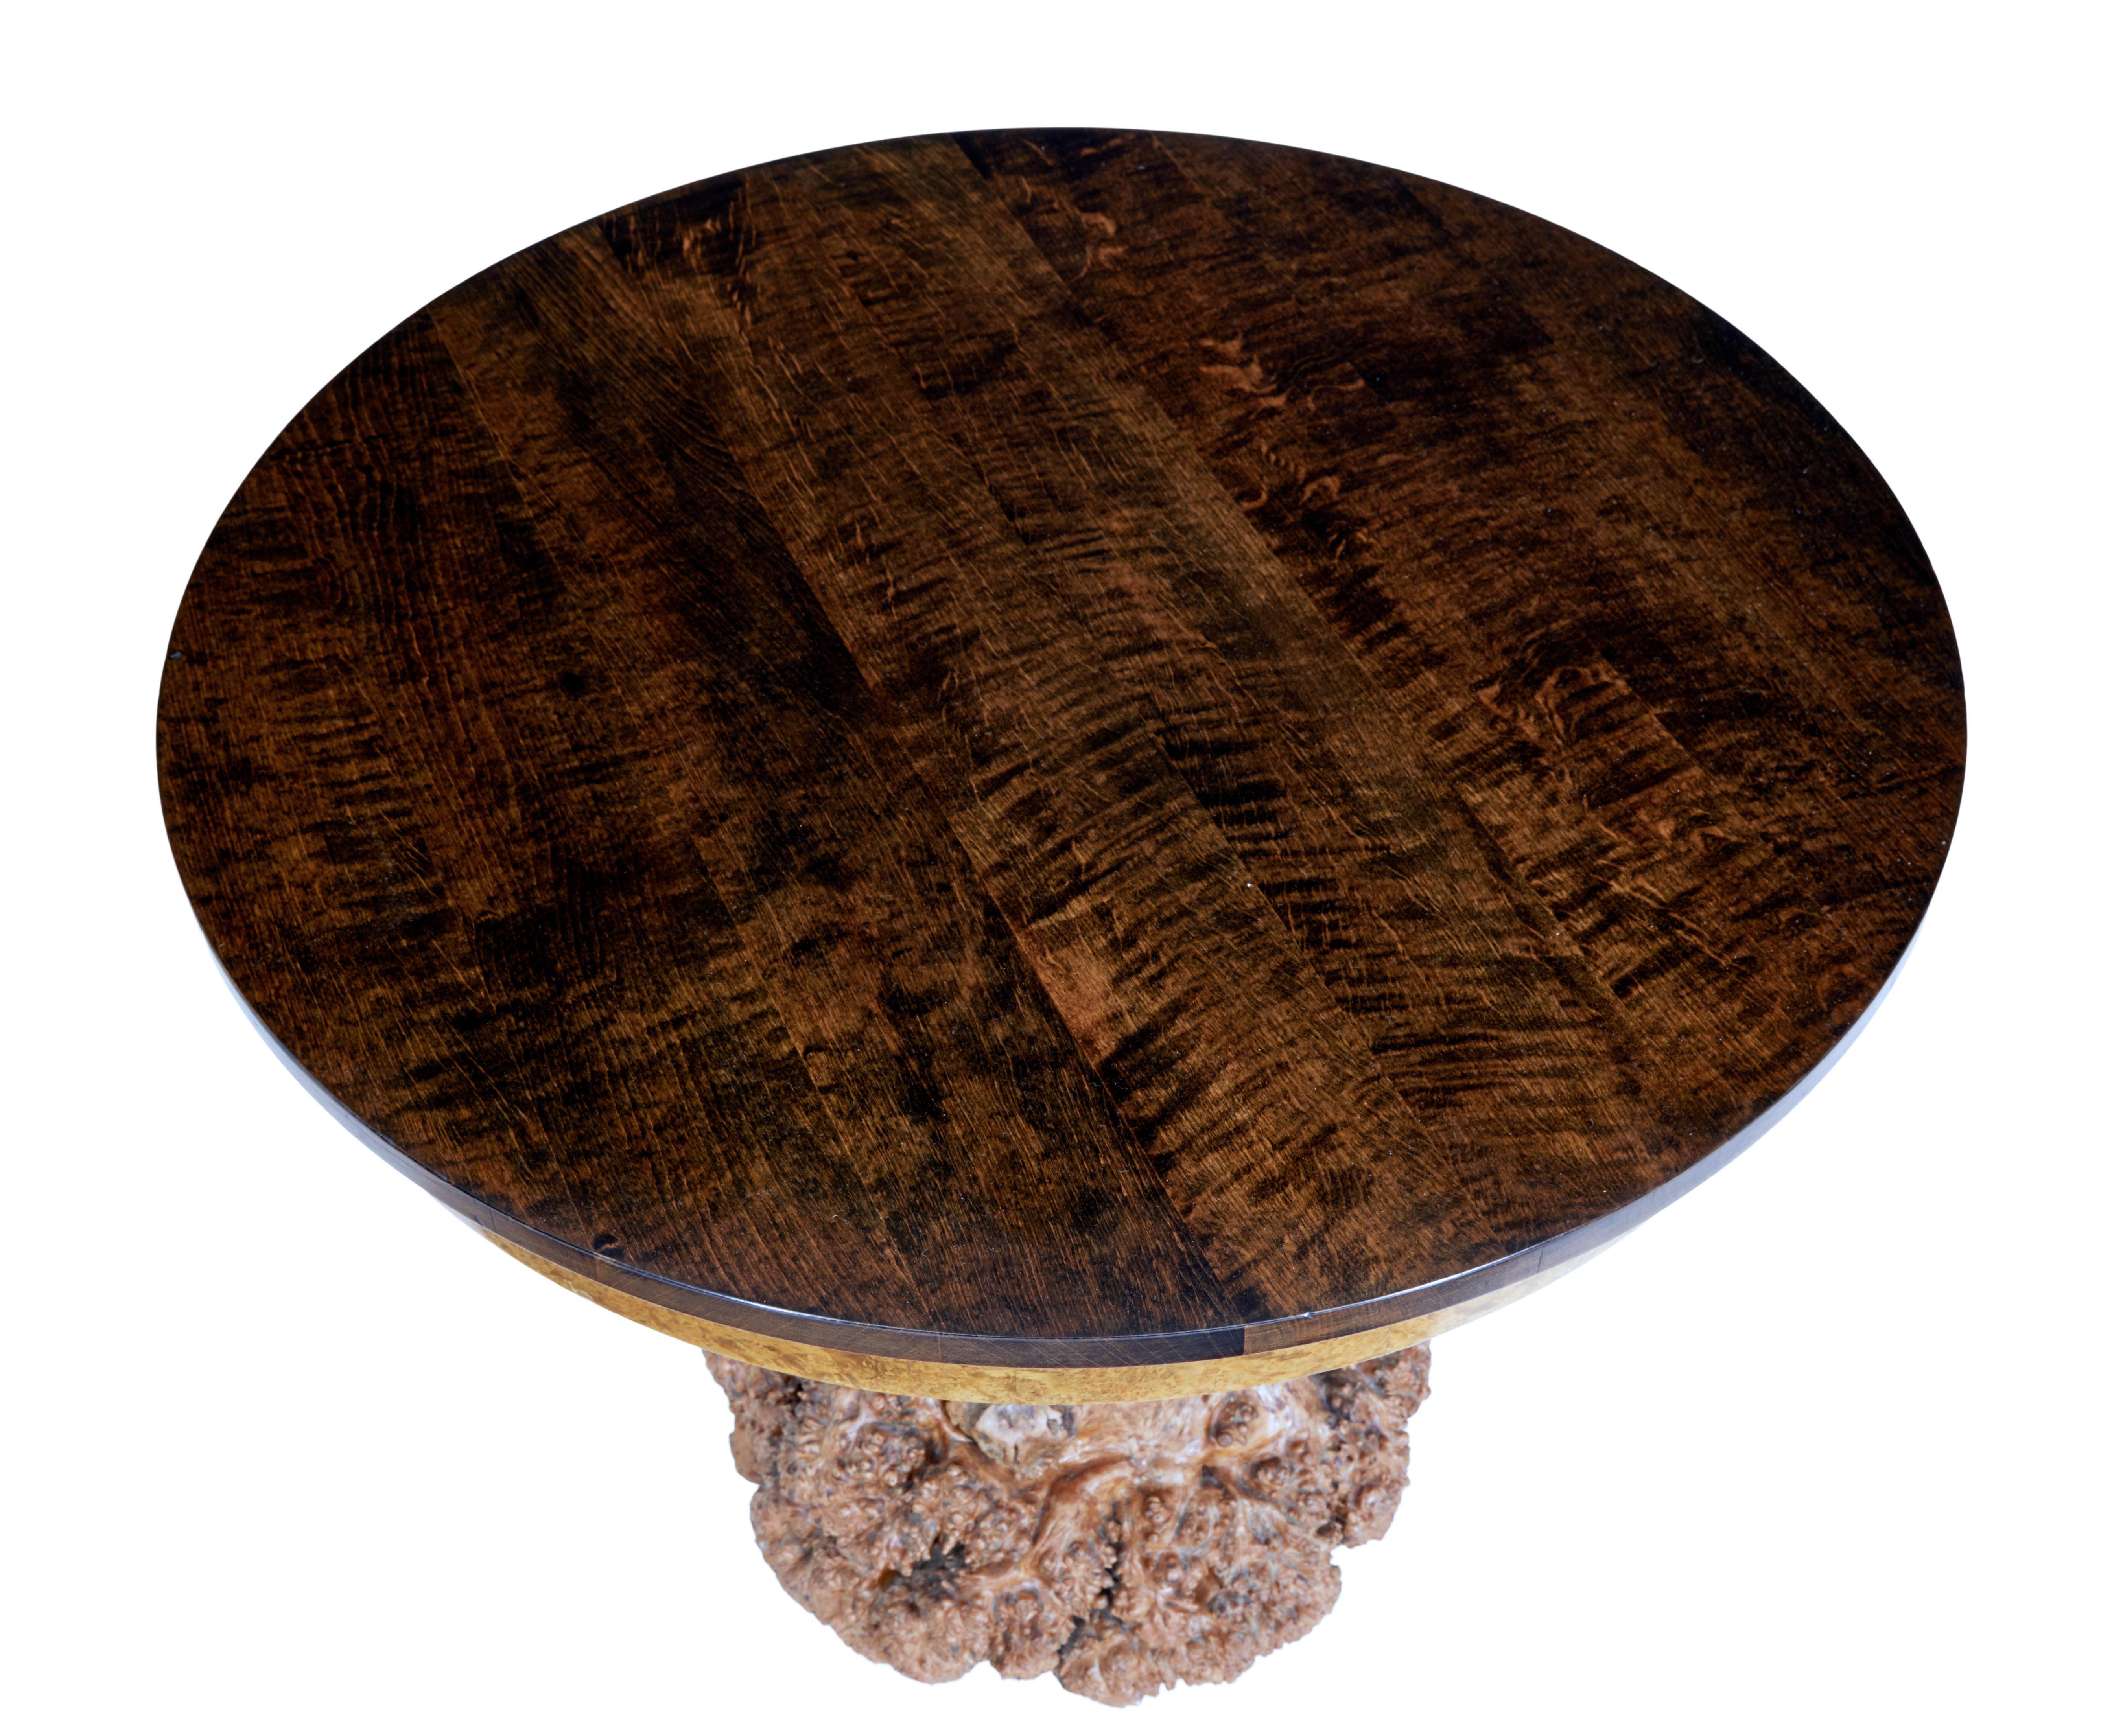 Unusual circular occasional table with burr root base circa 1930.

Recently re-polished dark stained circular birch top with burr frieze, standing on burr root base which has been adapted to work as a base.

Rich golden colour.

Minor surface